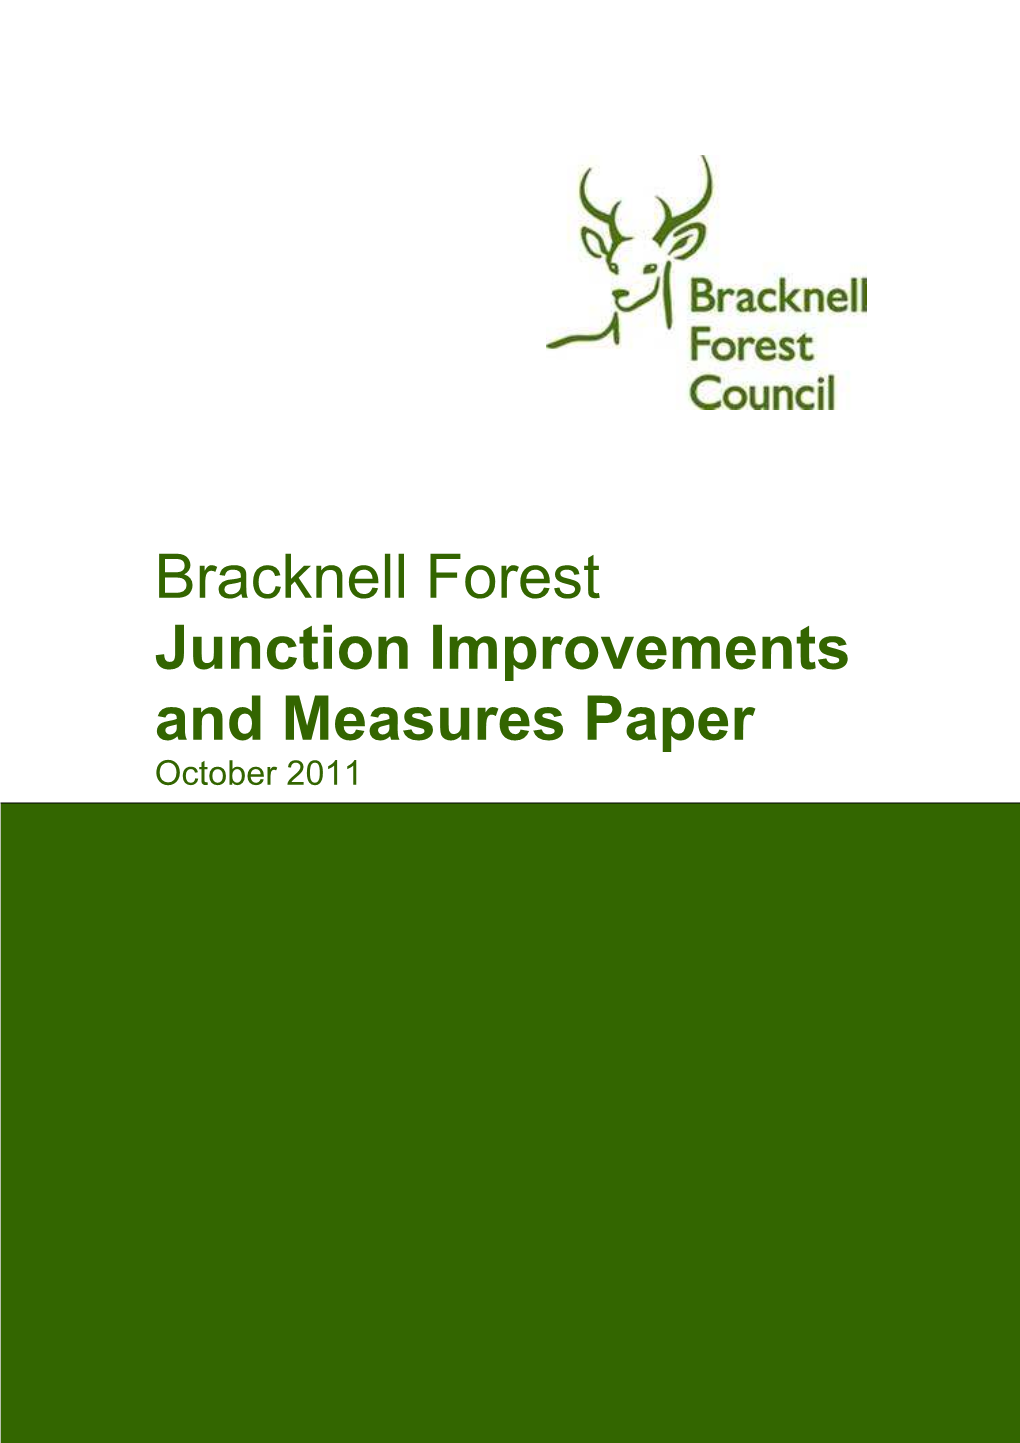 Junction Improvements and Measures Paper October 2011